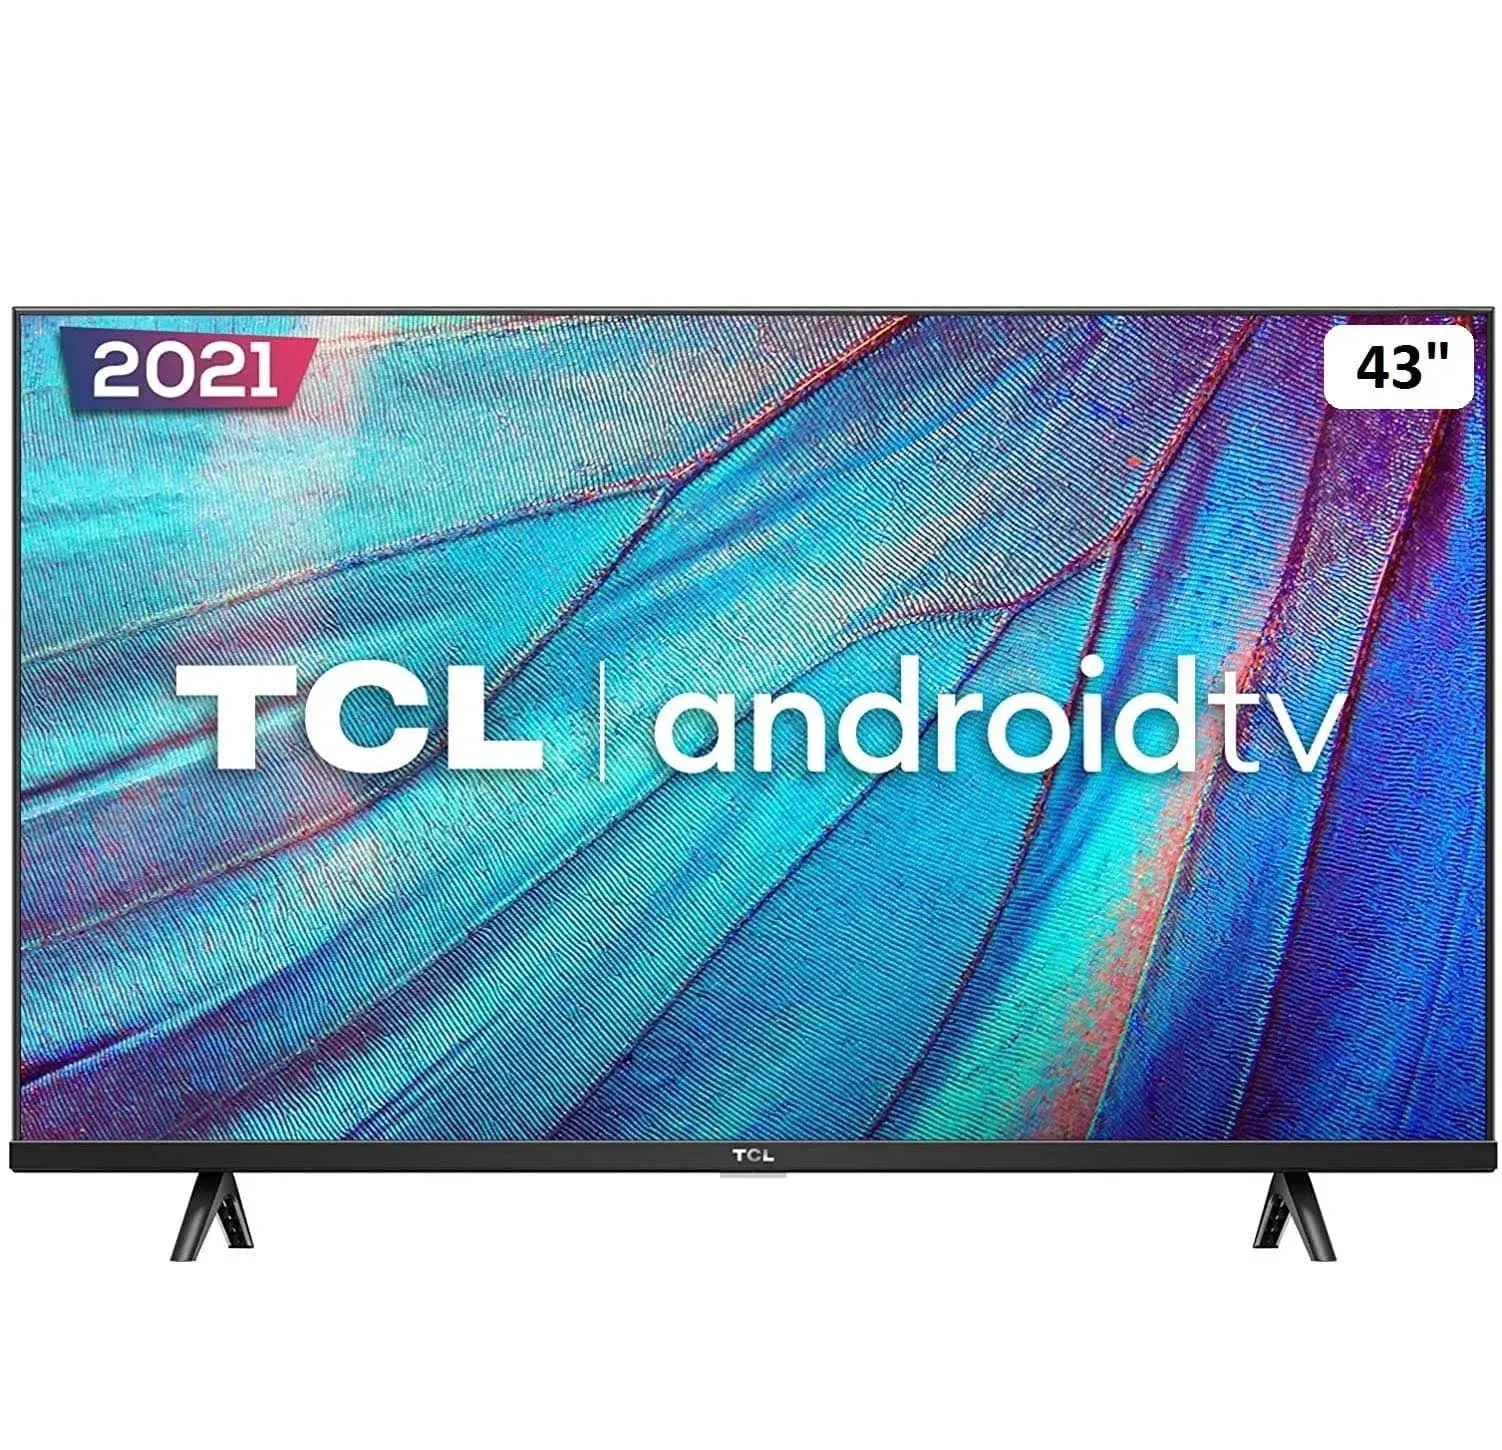 Smart Tv Tcl Led 43 Polegadas Full Hd Android Hdr 43S615